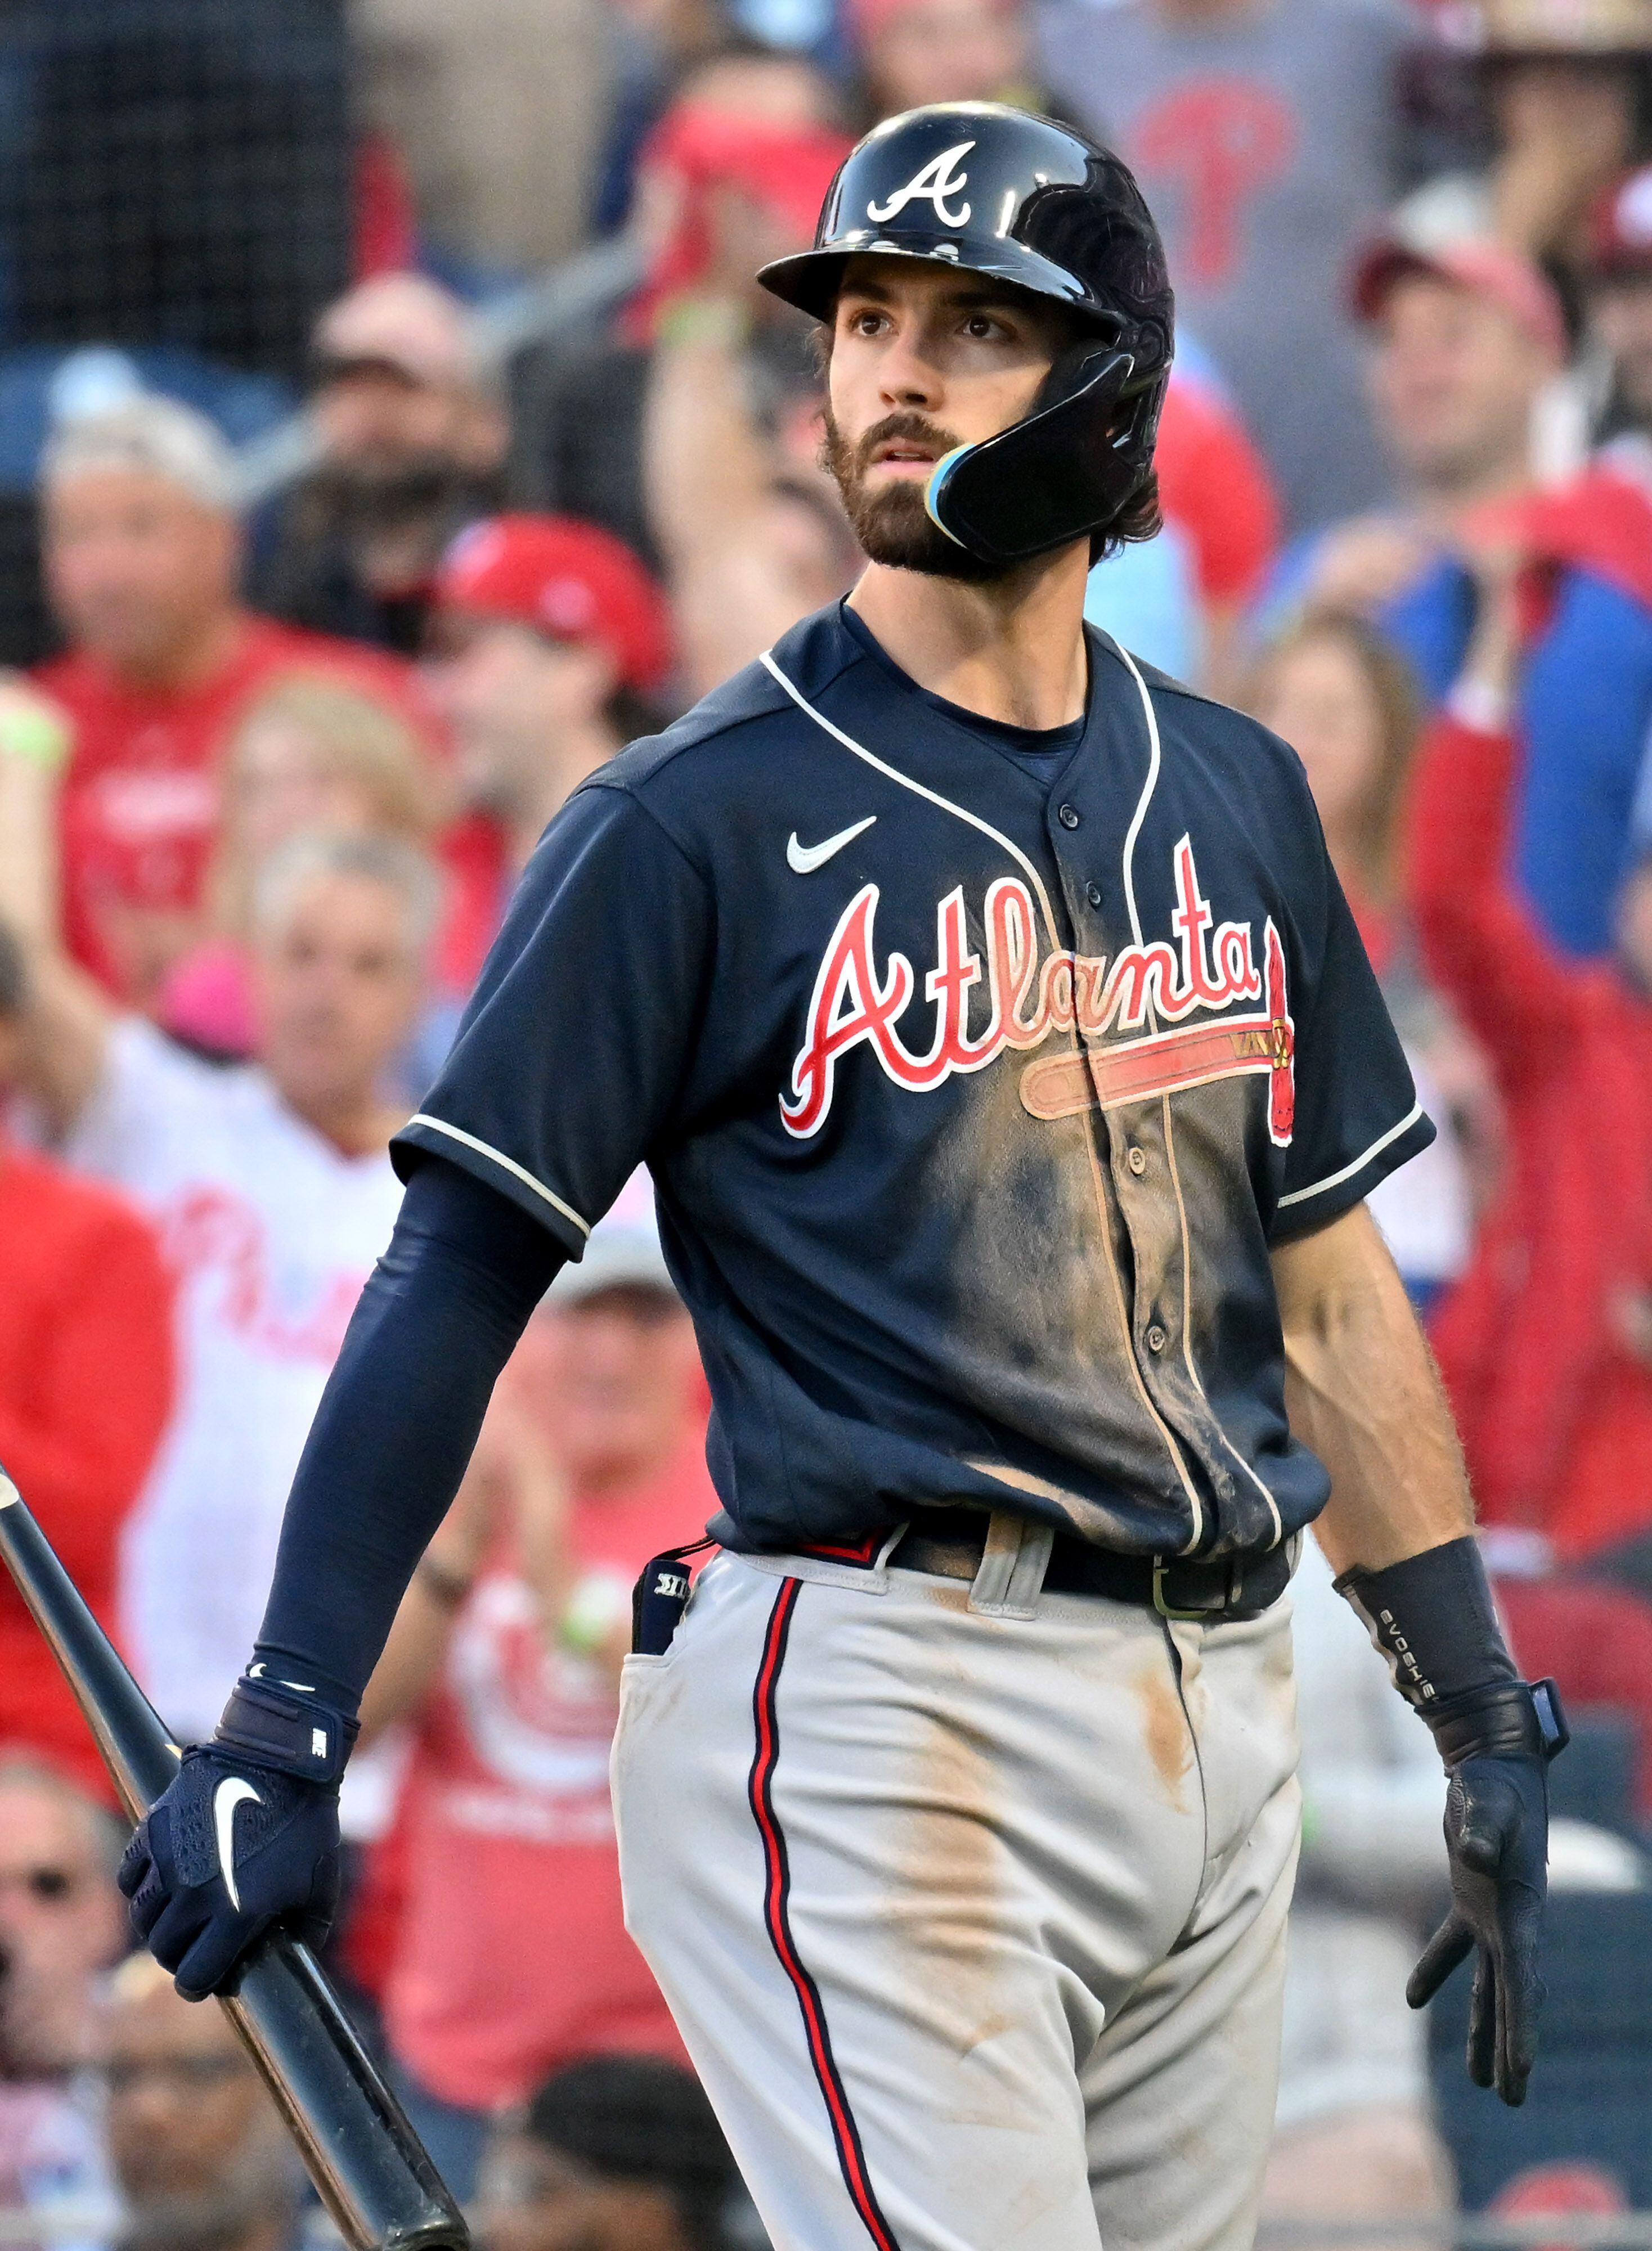 Brian Snitker tips hat to players following Braves' second consecutive  100-win season - It's unbelievable and hard to do